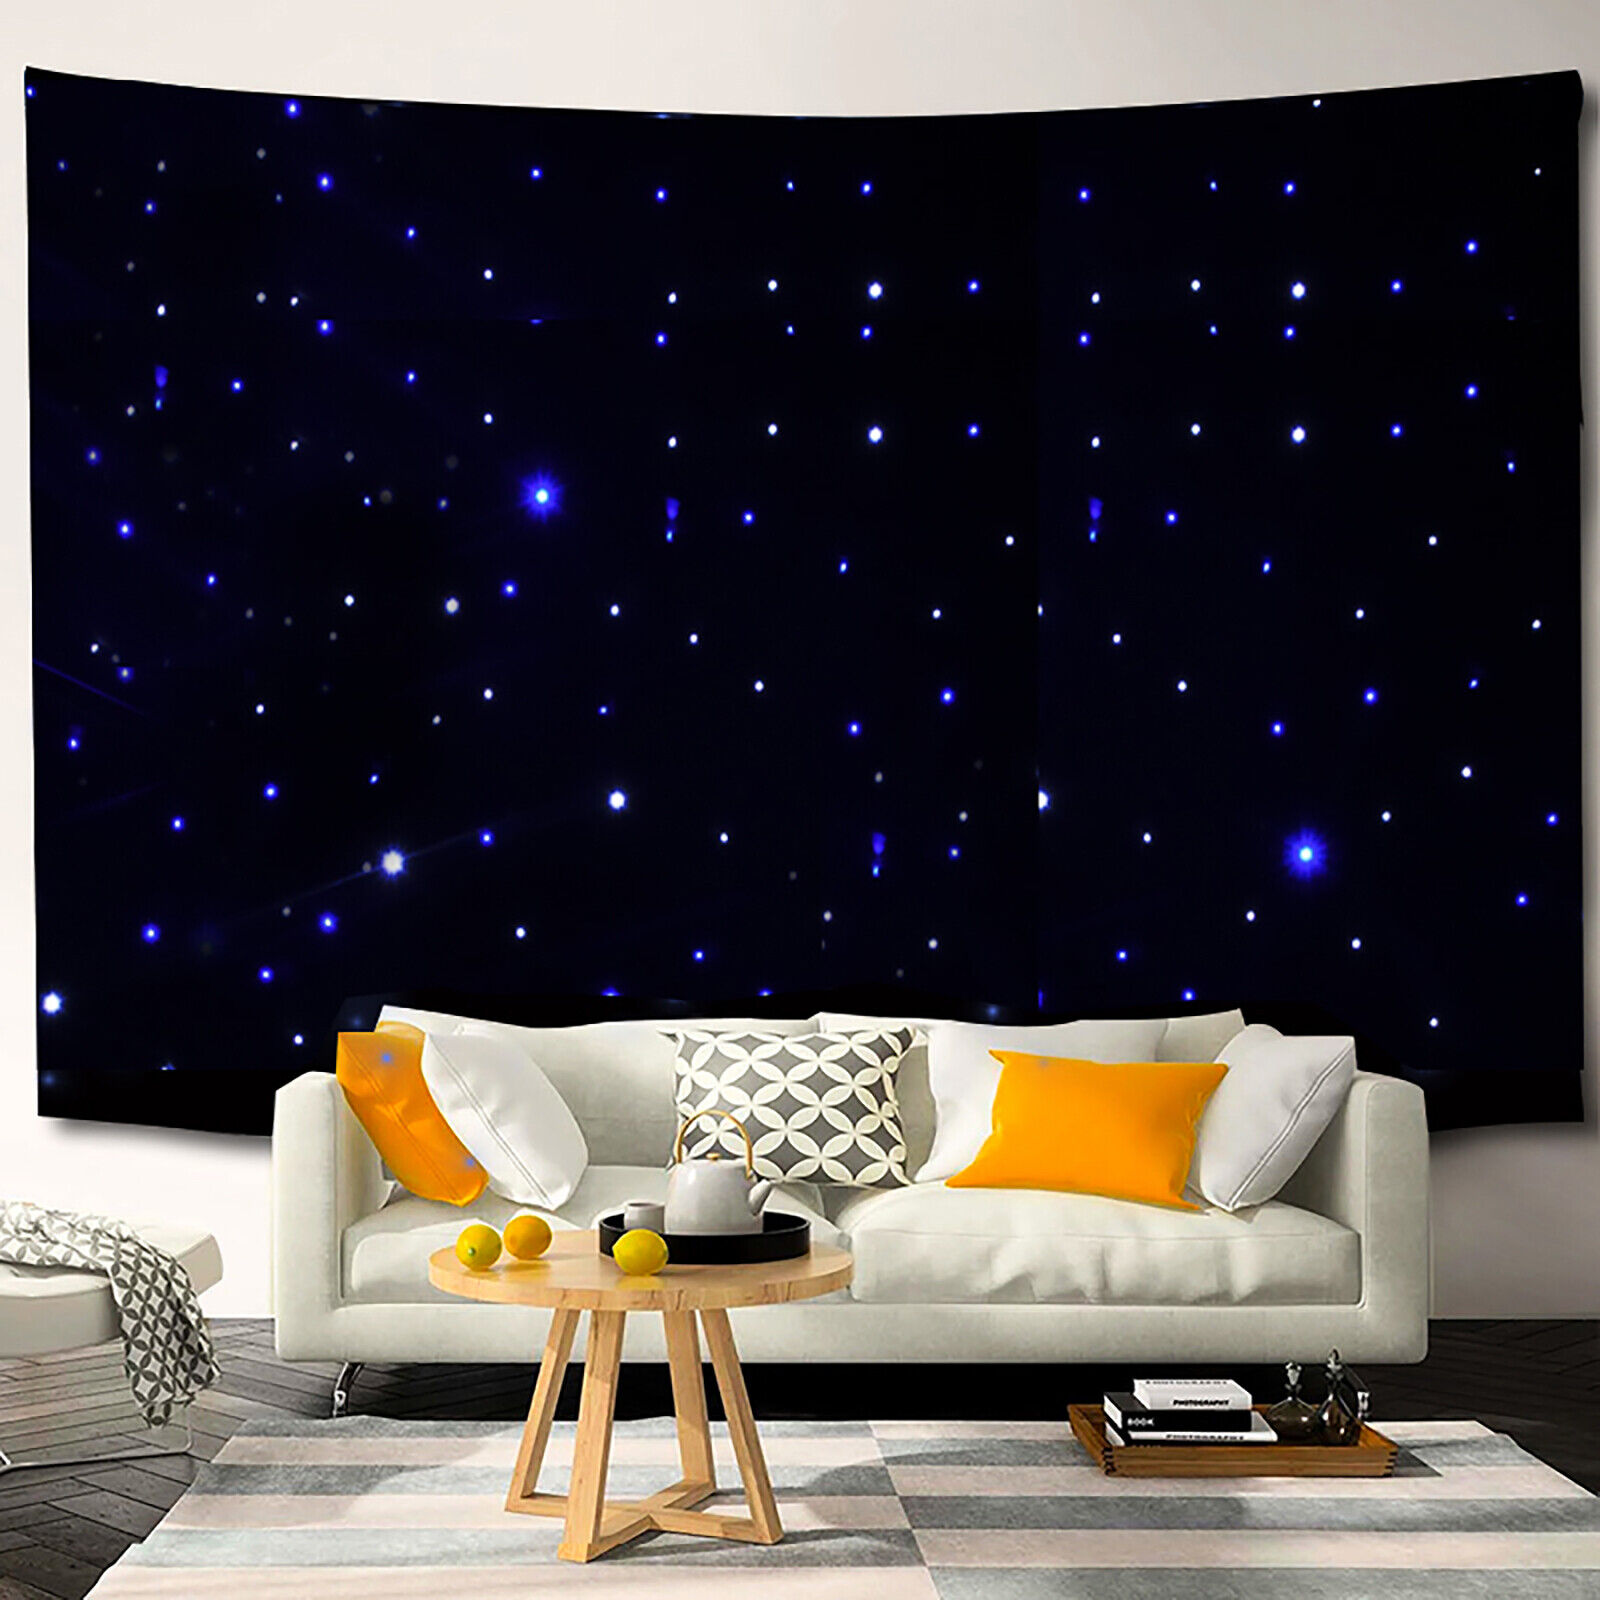 LED Star Backdrop Curtain Wedding Party Retardant Curtain Out/Indoor w/ Remote Unbranded Does not apply - фотография #3